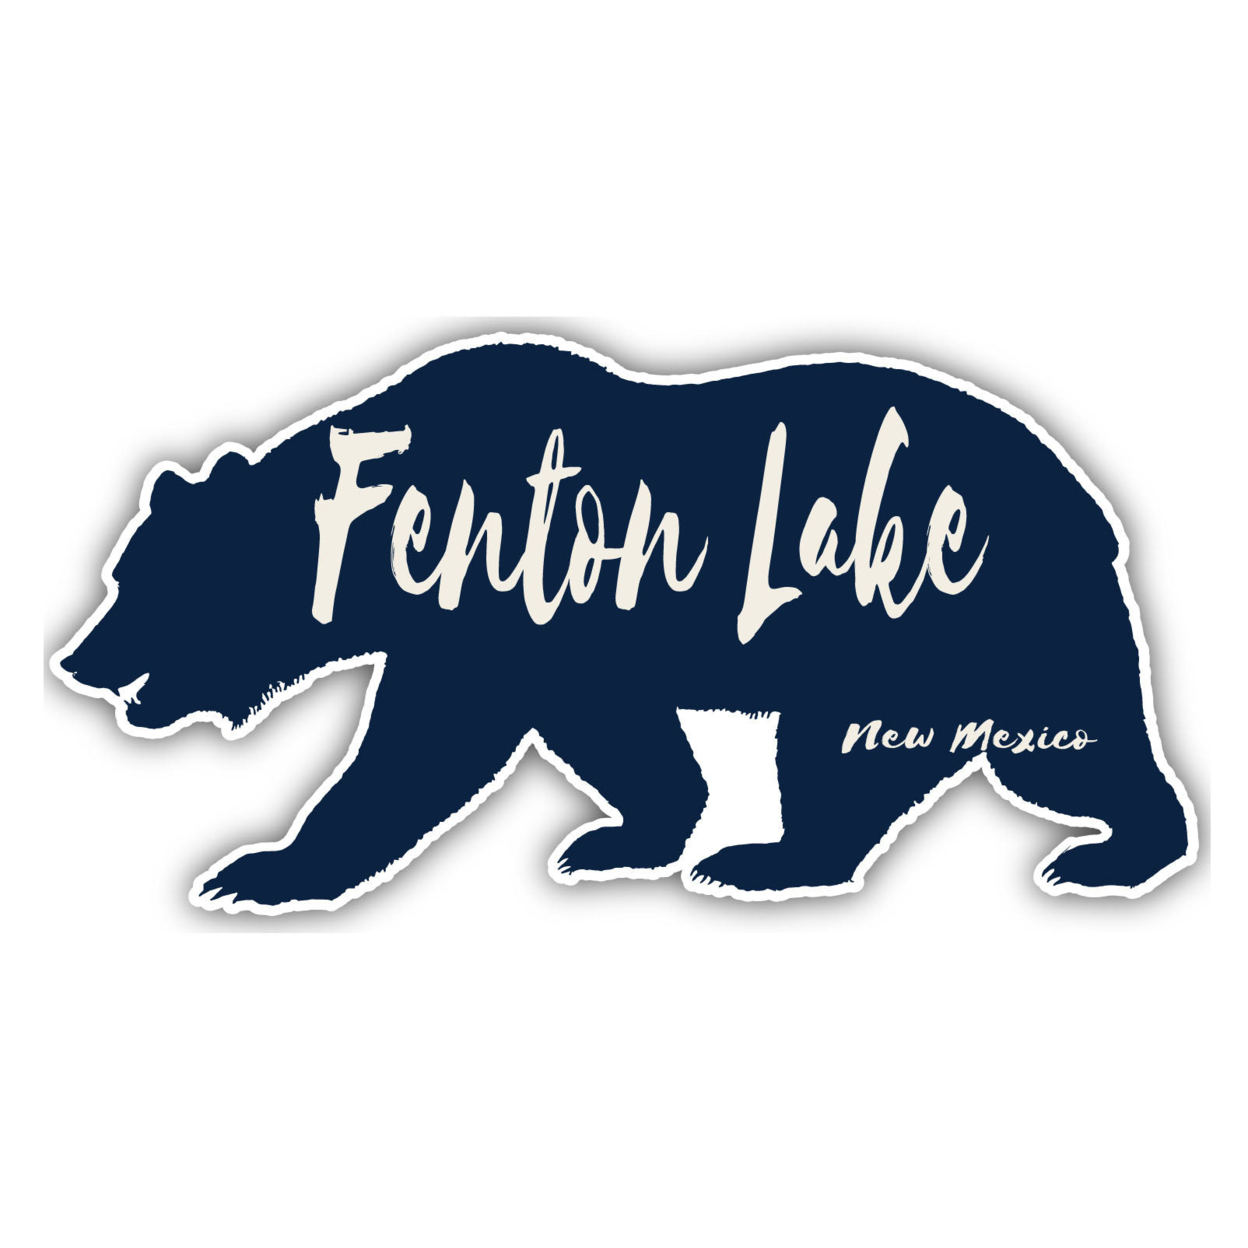 Fenton Lake New Mexico Souvenir Decorative Stickers (Choose Theme And Size) - 4-Pack, 2-Inch, Bear